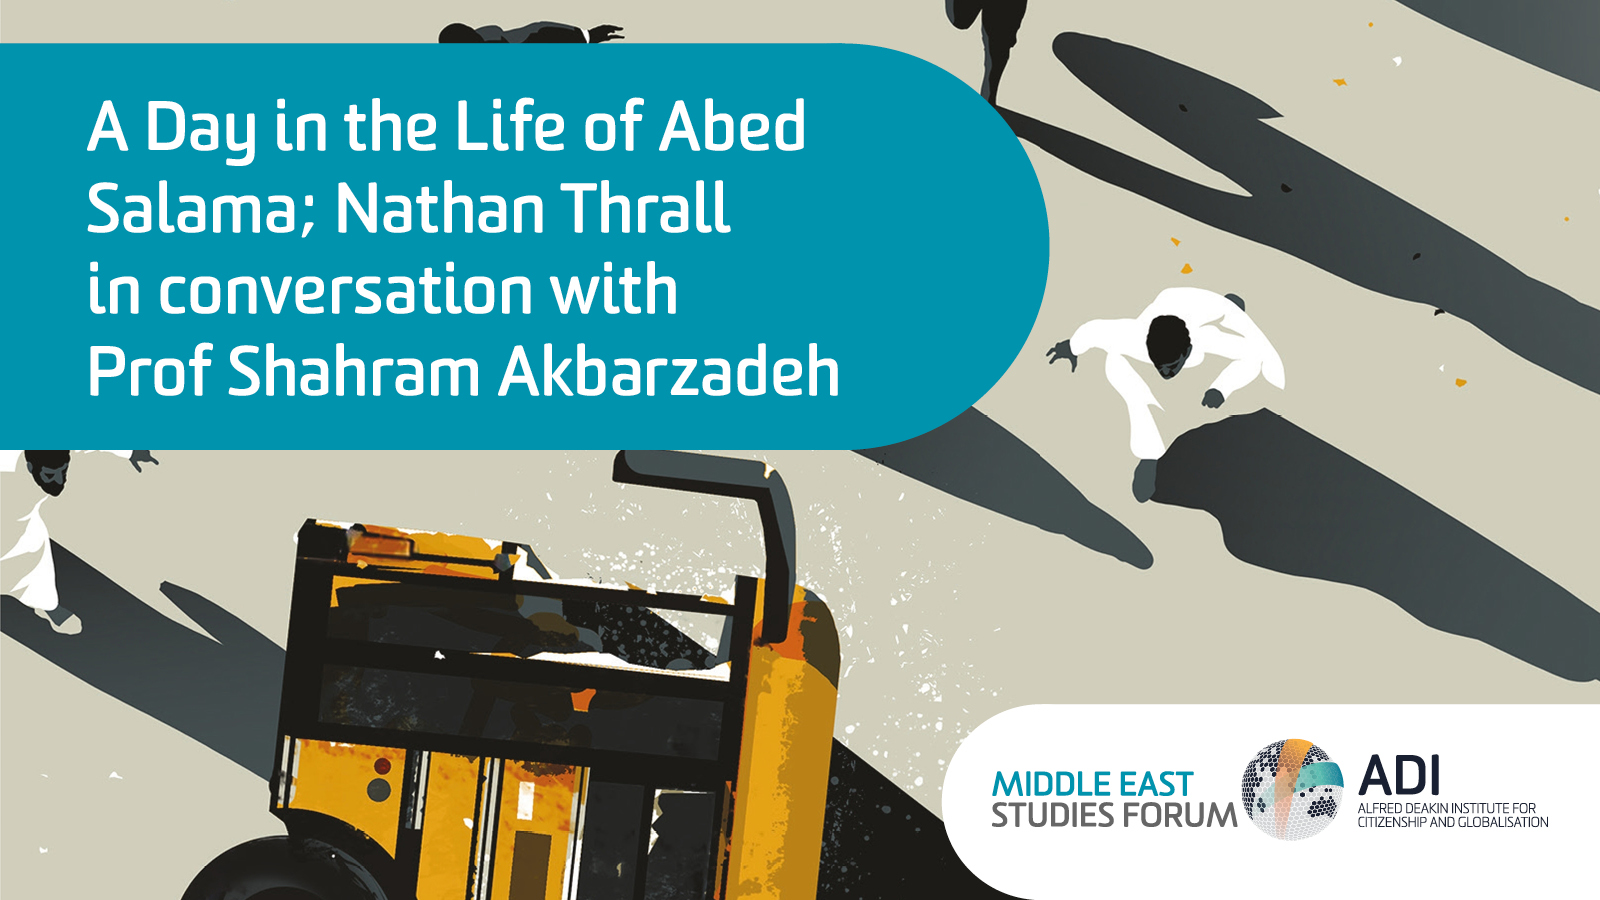 A Day in the Life of Abed Salama; Nathan Thrall in conversation with Prof Shahram Akbarzadeh